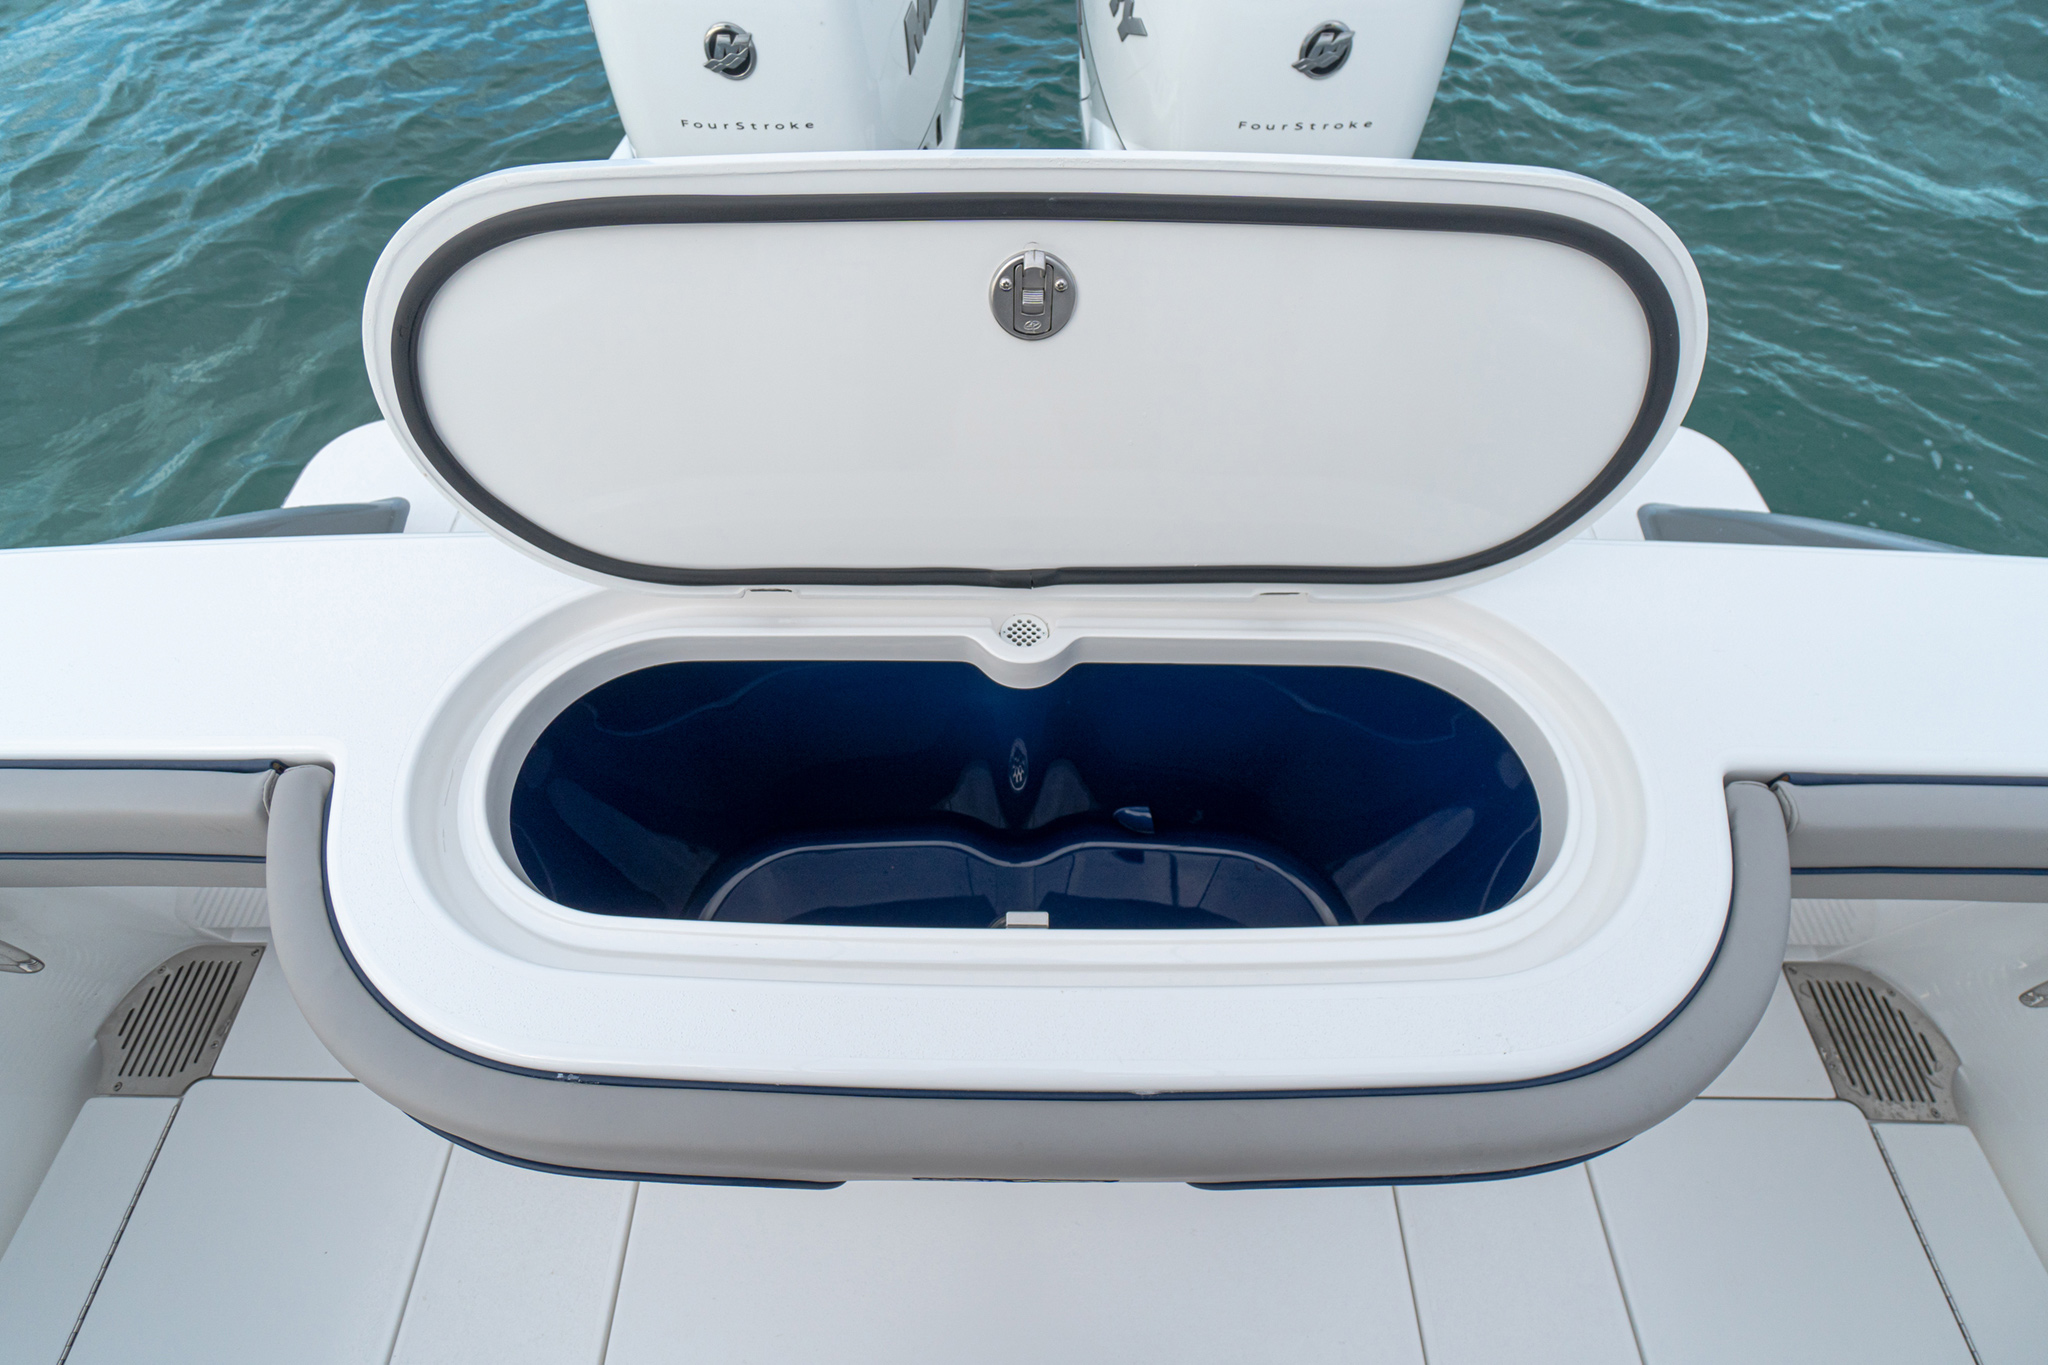 Transom live well with deep gutter, overboard drainage, bait-life-extending blue interior.